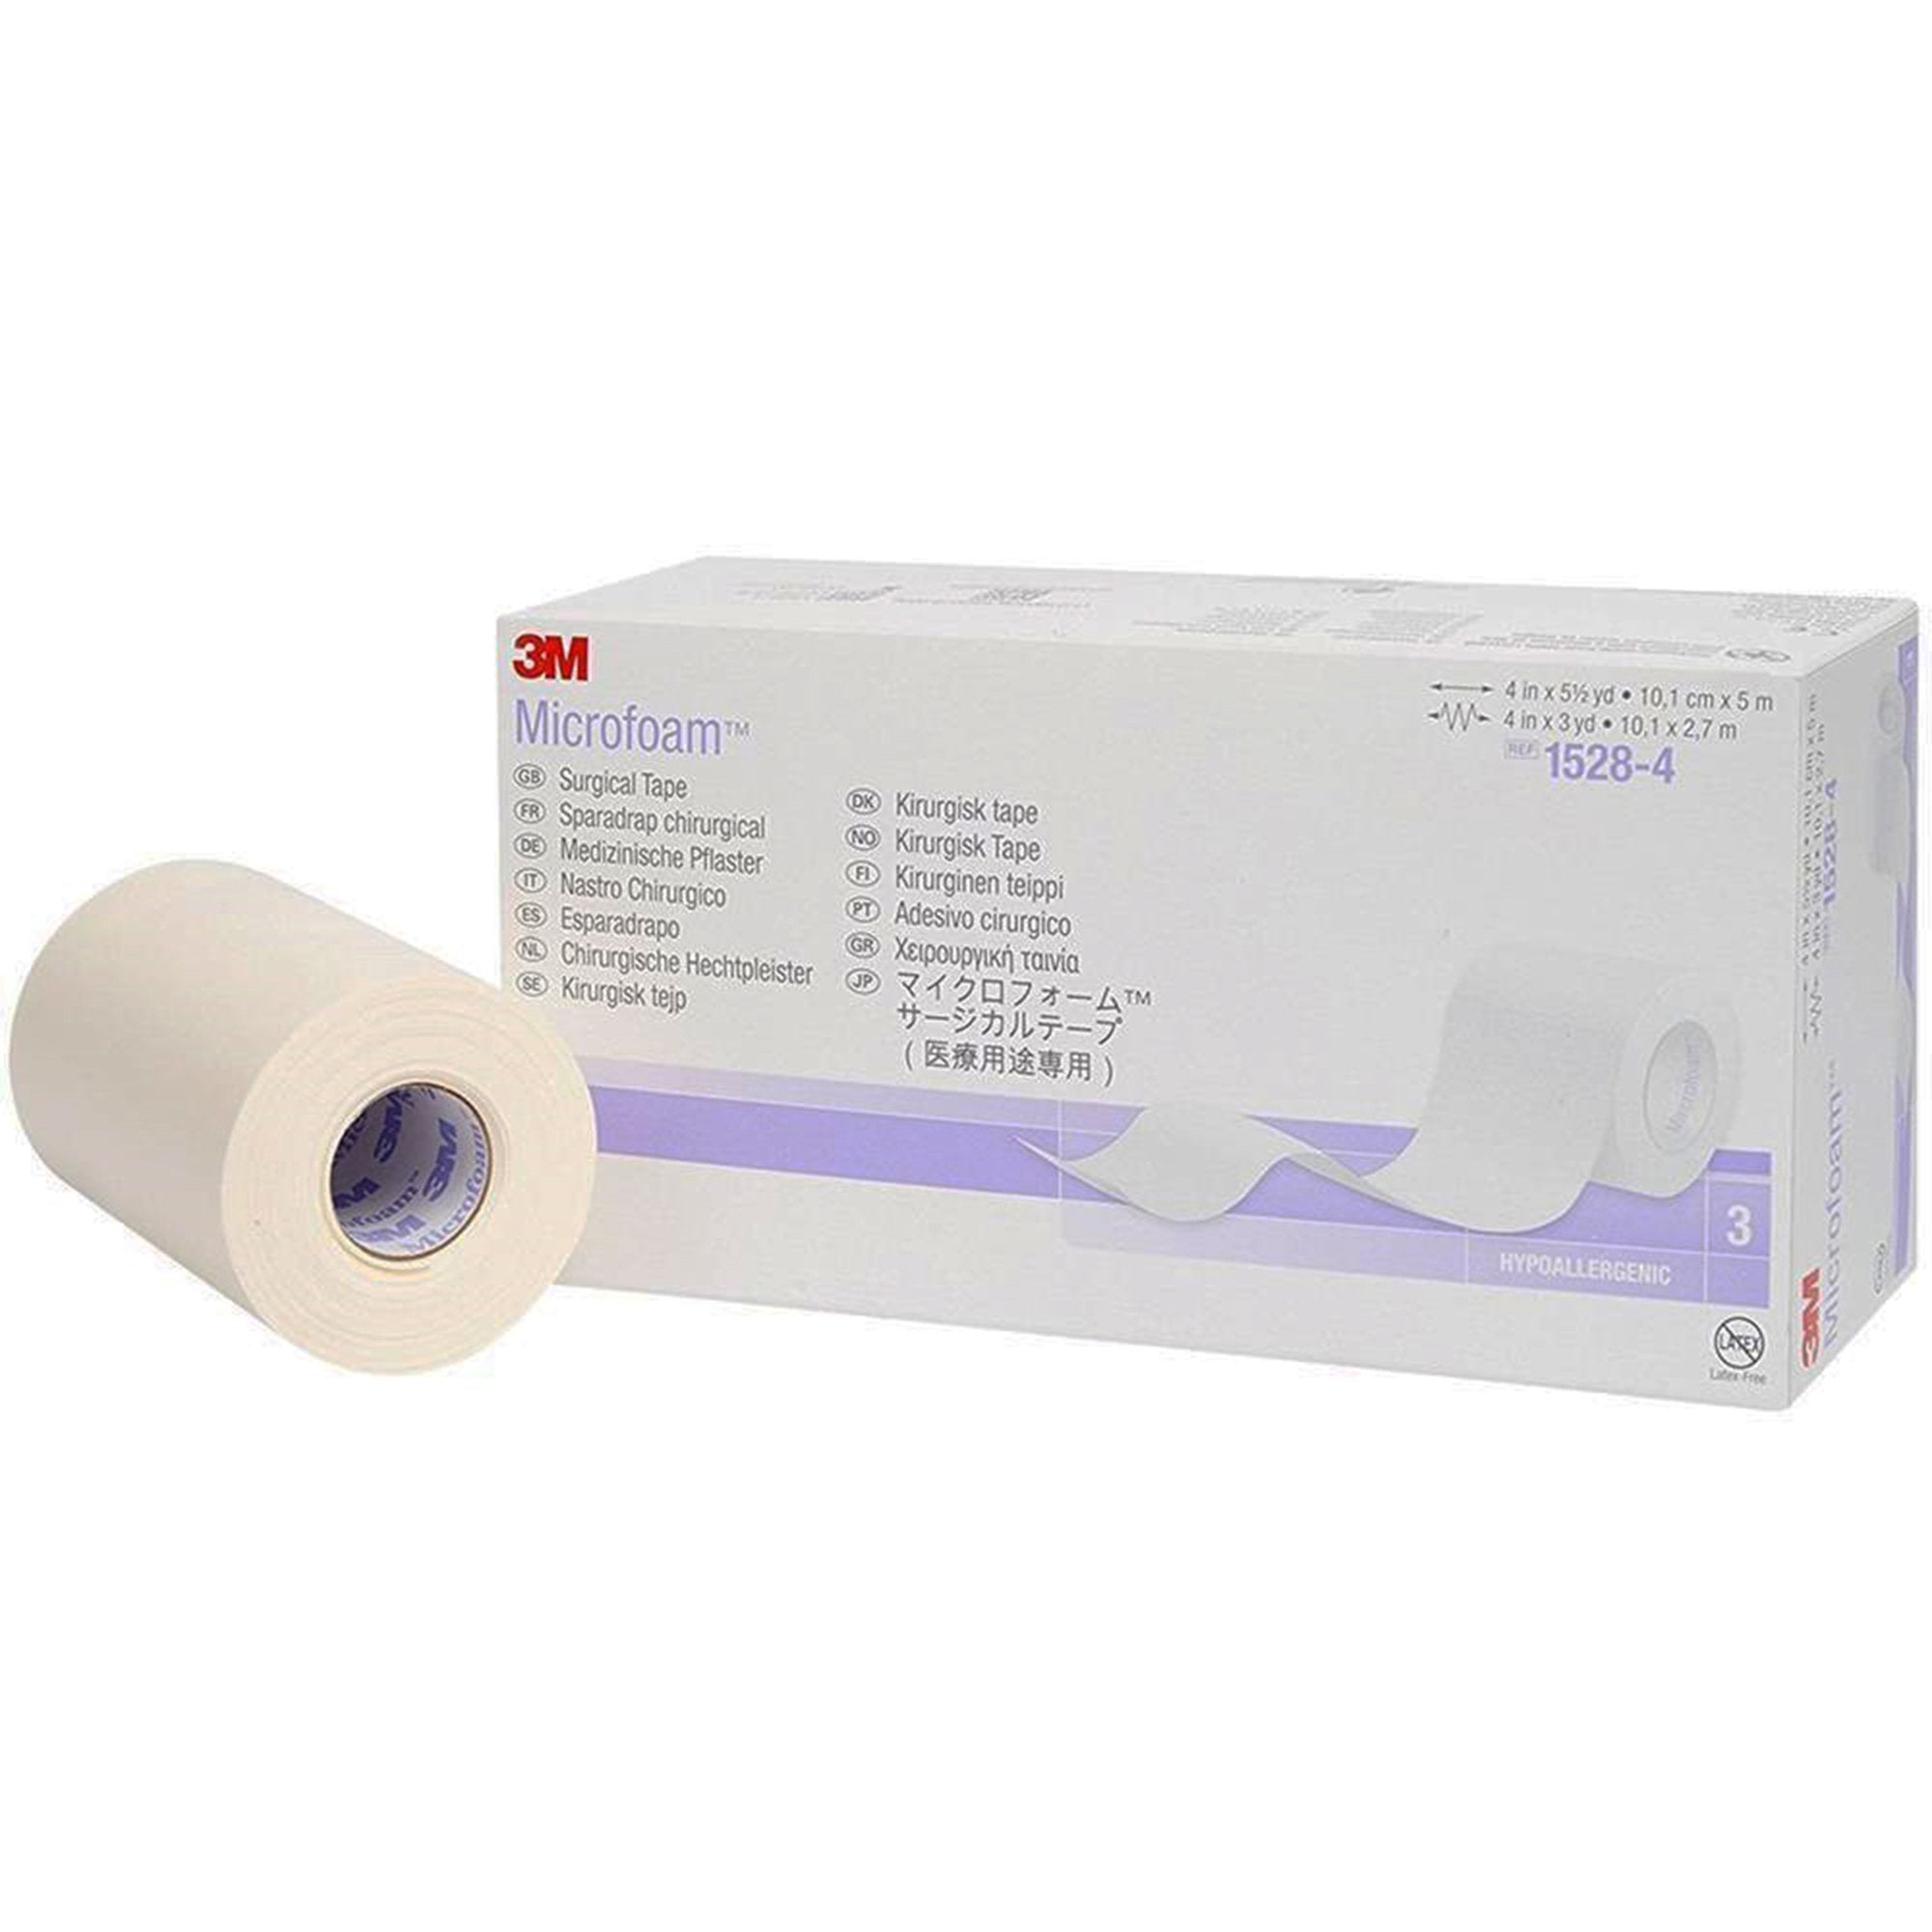 Buy Medical Tapes, Surgical Tapes